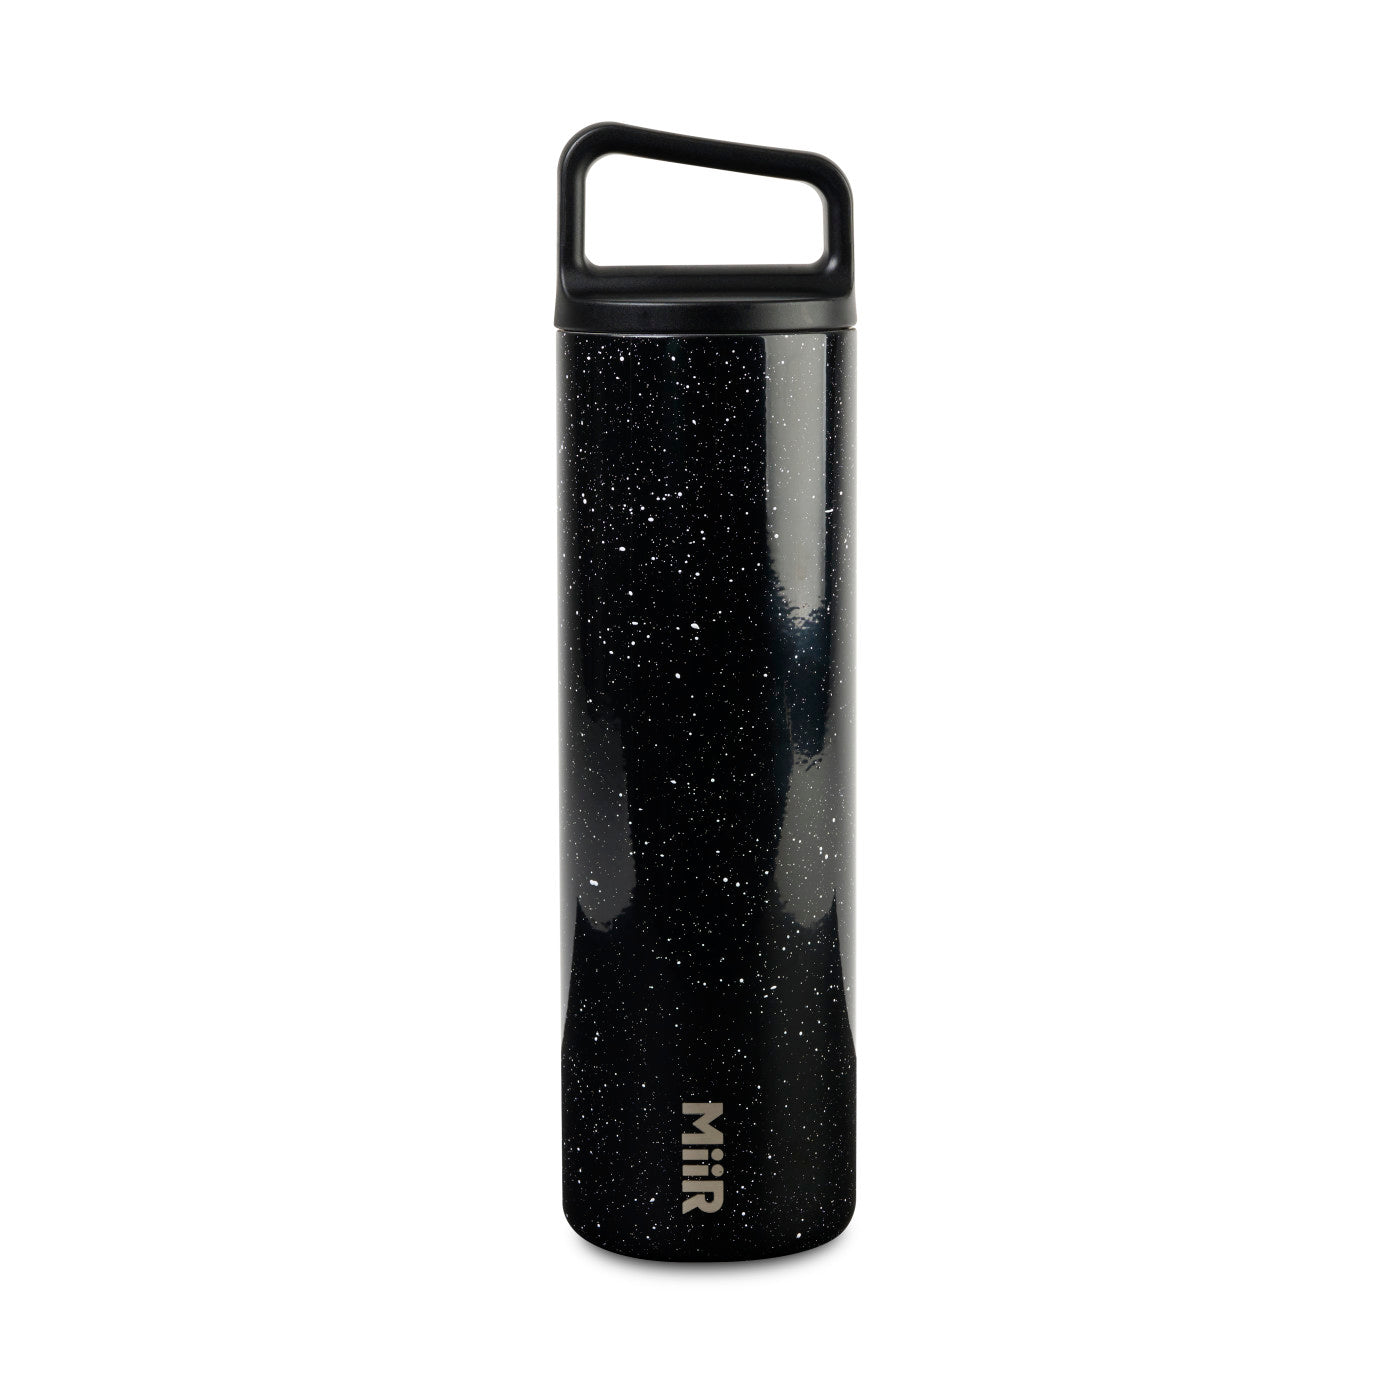 Customizable Miir® 20 oz Insulated Wide-Mouth Bottle in speckle black.